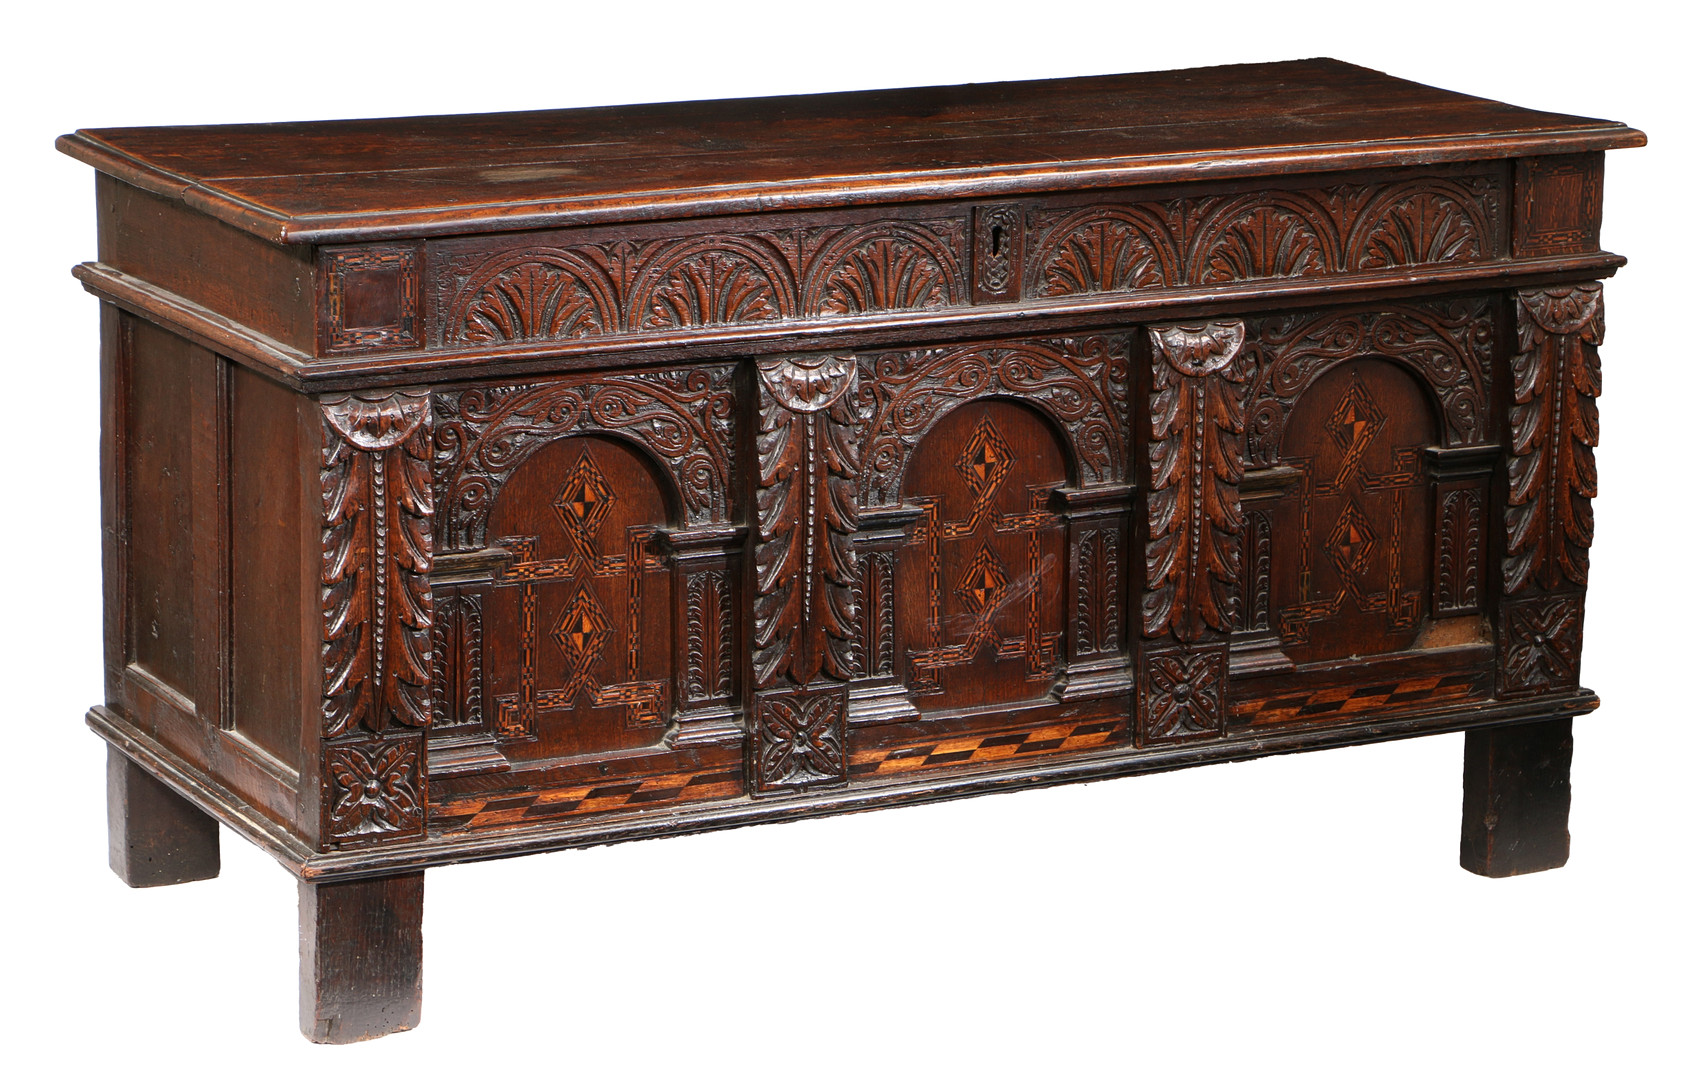 A JAMES I OAK AND PARQUETRY INLAID COFFER, WEST COUNTRY, CIRCA 1610. - Image 3 of 3